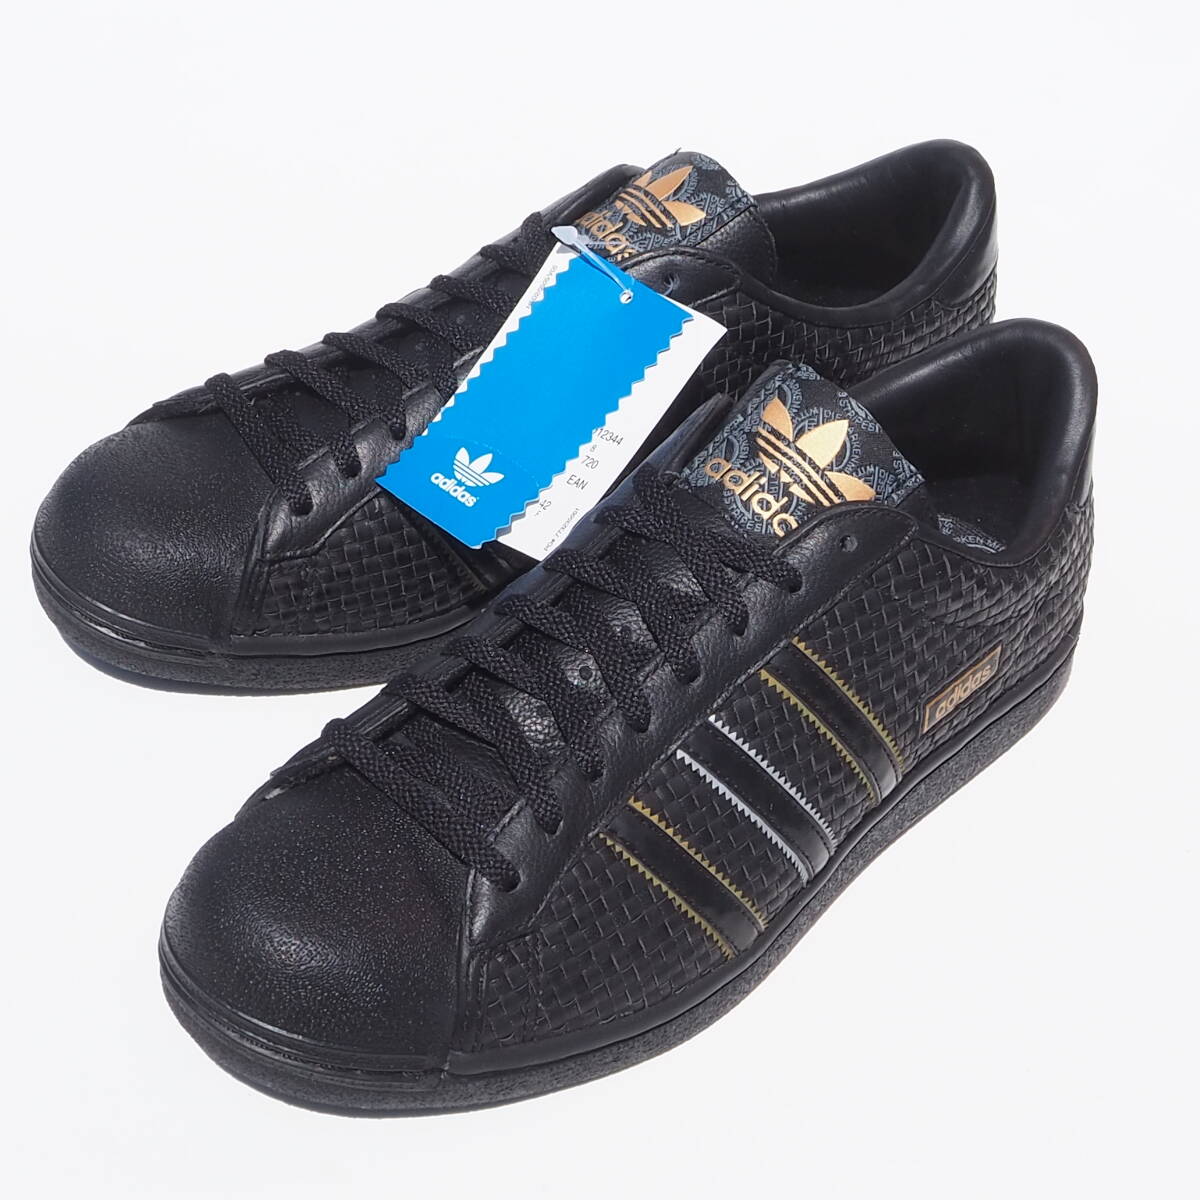  dead!! US 8 1/2/ 26,5cm new goods 2006 year made adidas wilhelm bungert Will hell mbn gel to black leather u-bn natural leather 